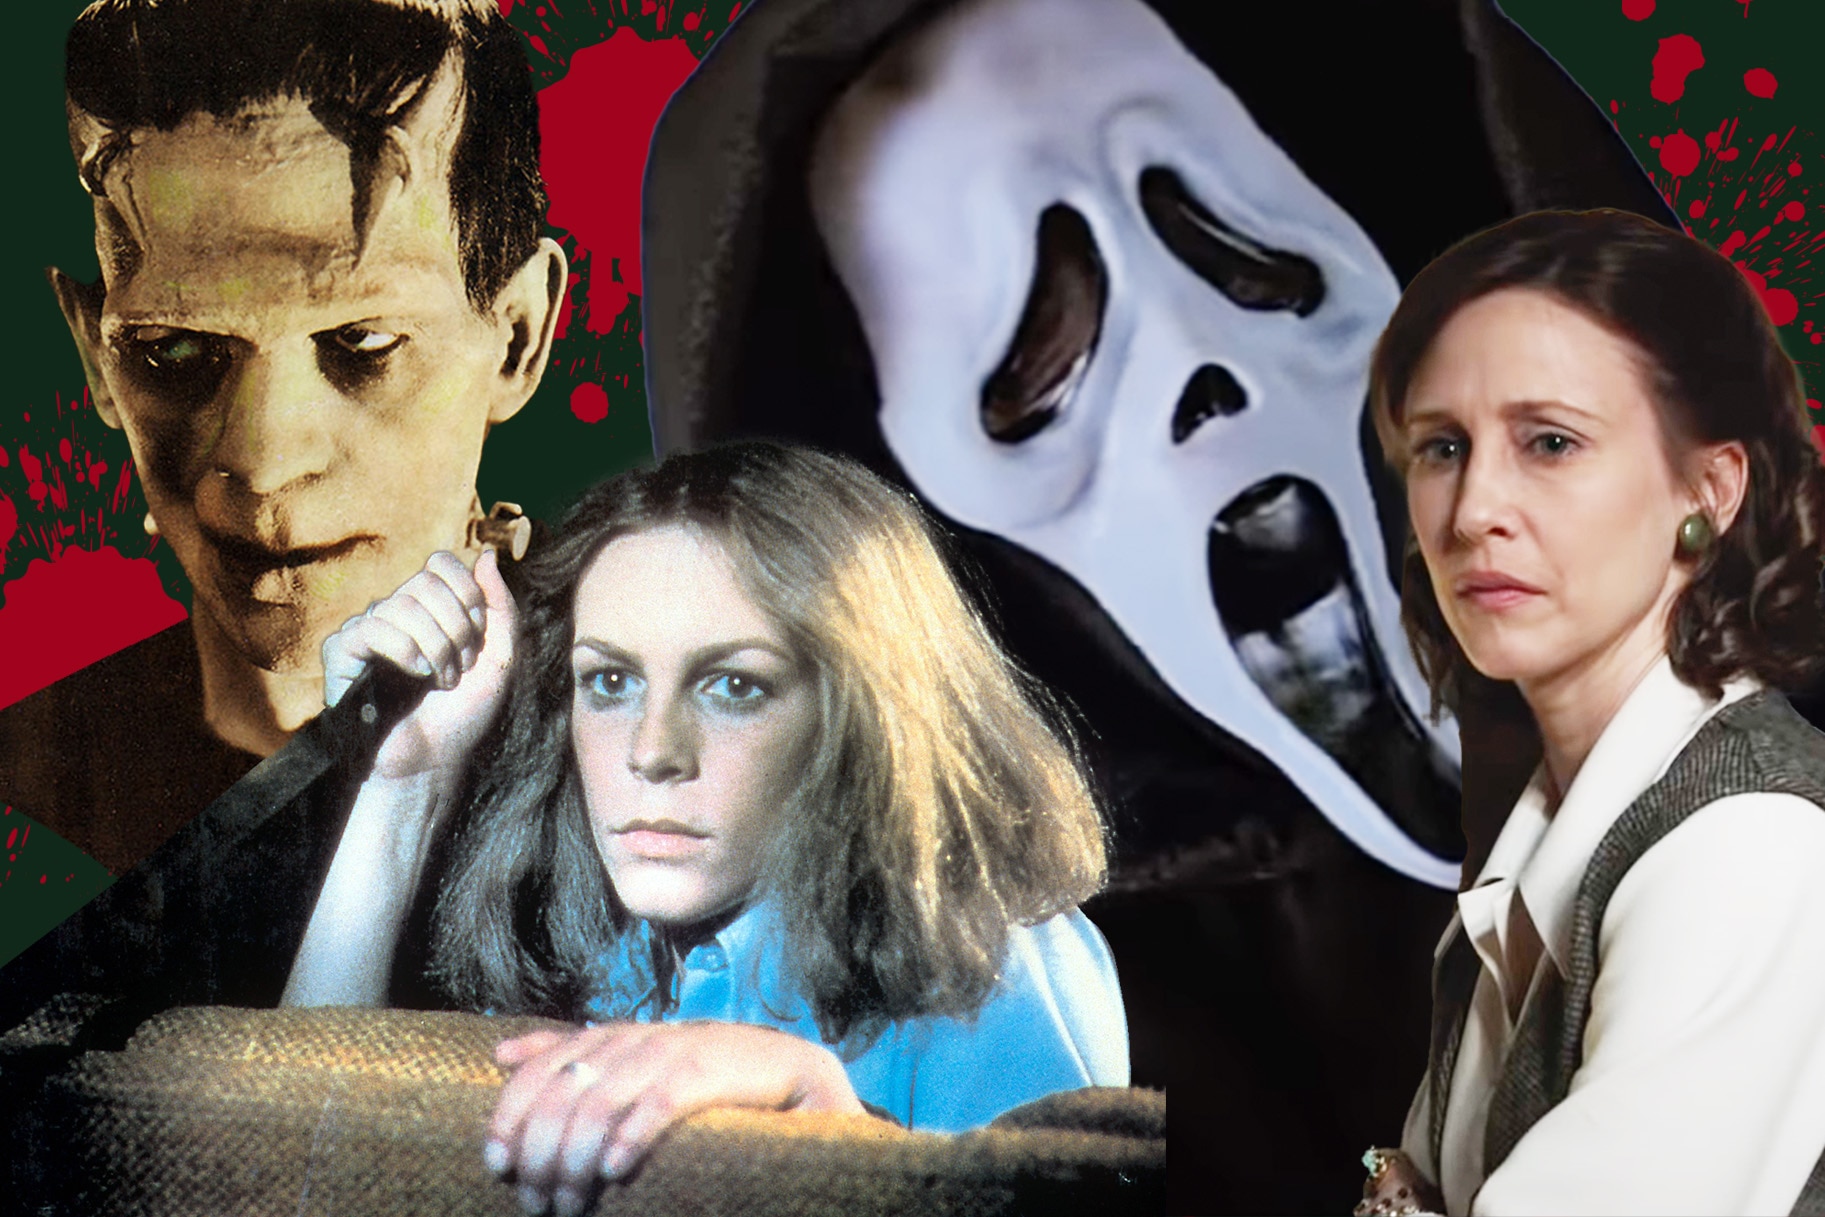 The Best Slasher Movies of the 21st Century So Far